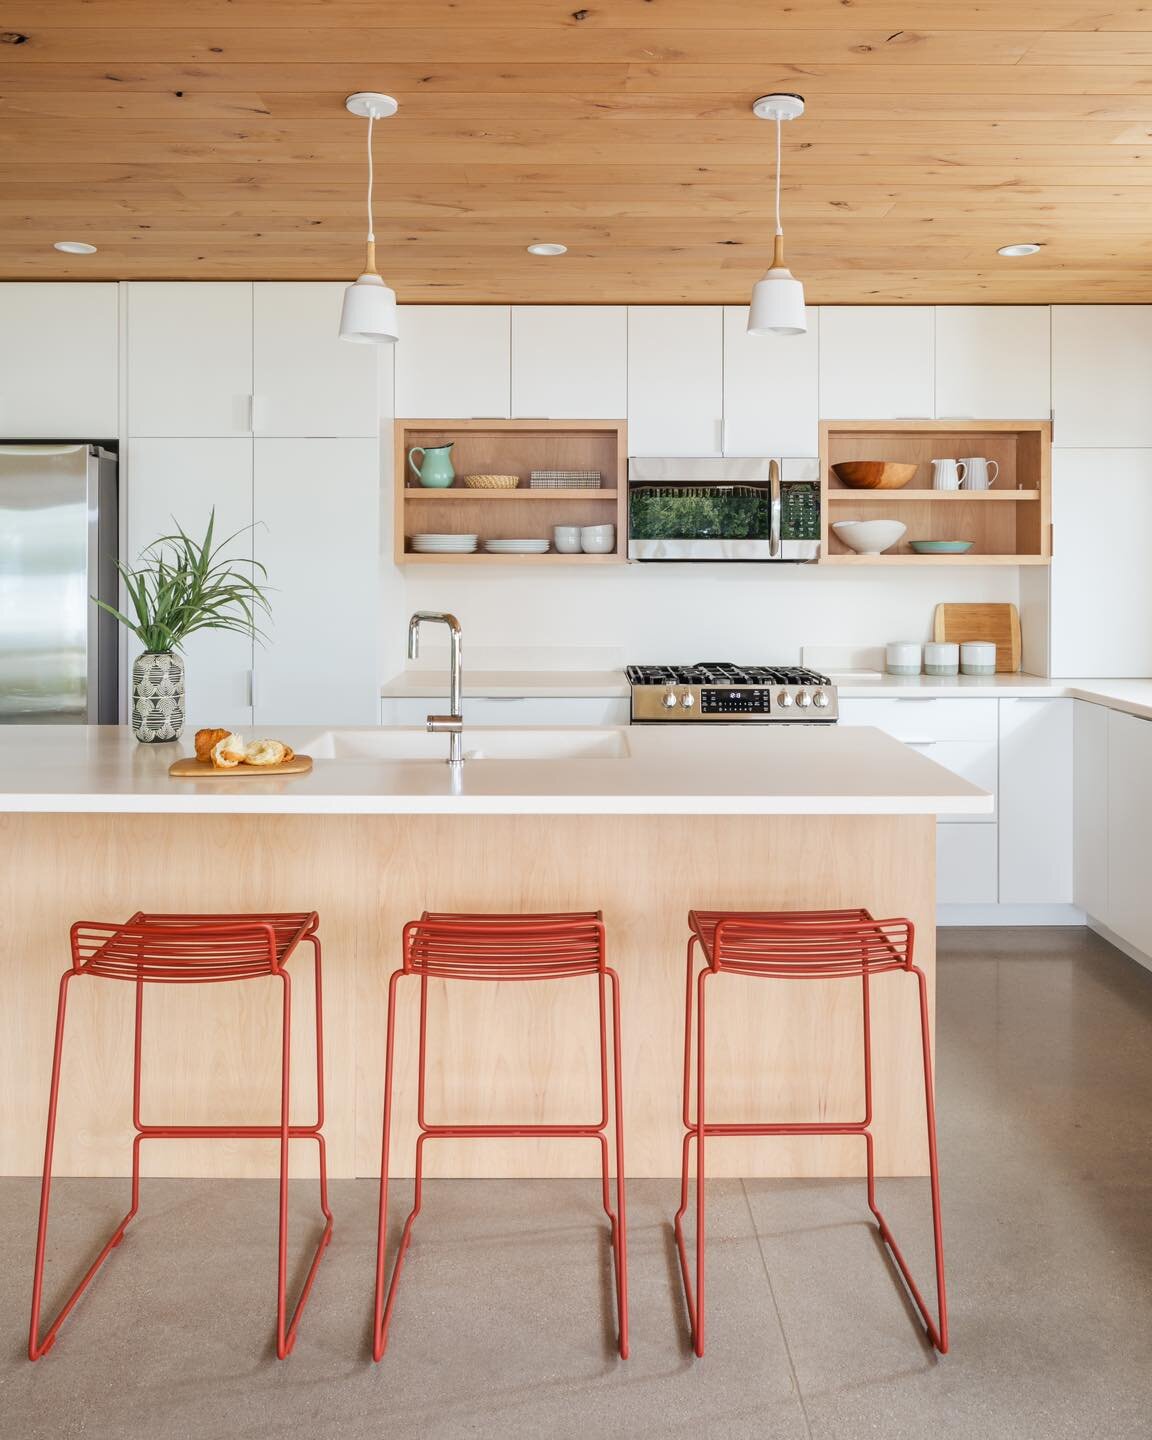 White walls and concrete floors can sometimes feel really cold&hellip; so we designed this kitchen with elements of warmth to help balance it out  #modern #traversecity #tcarchitect #lessismore